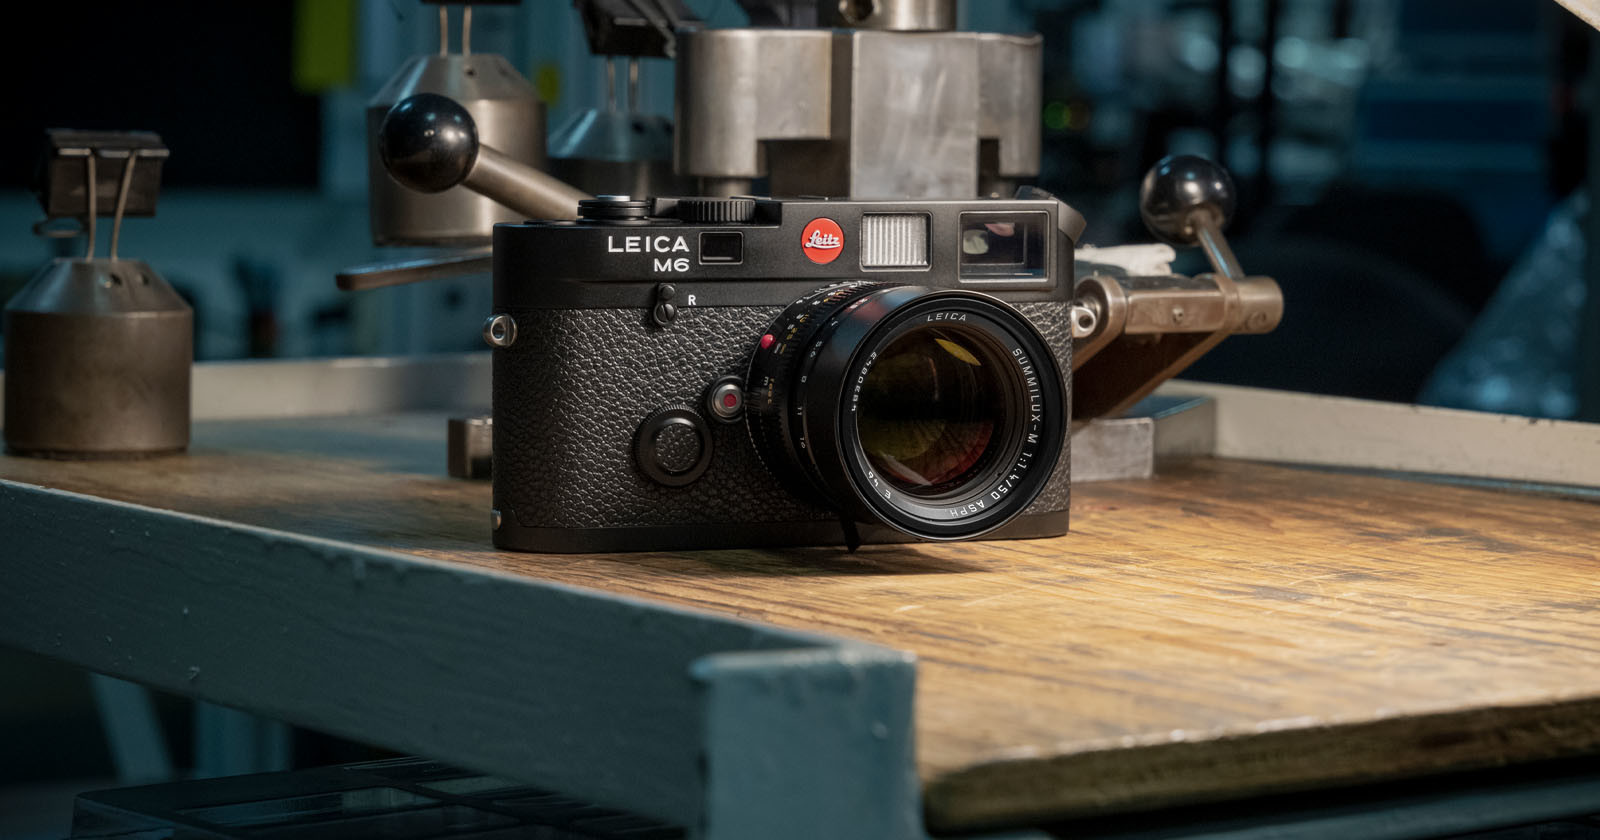 Leica Revives the M6, a 35mm Film Camera it Hasnt Produced Since 2002